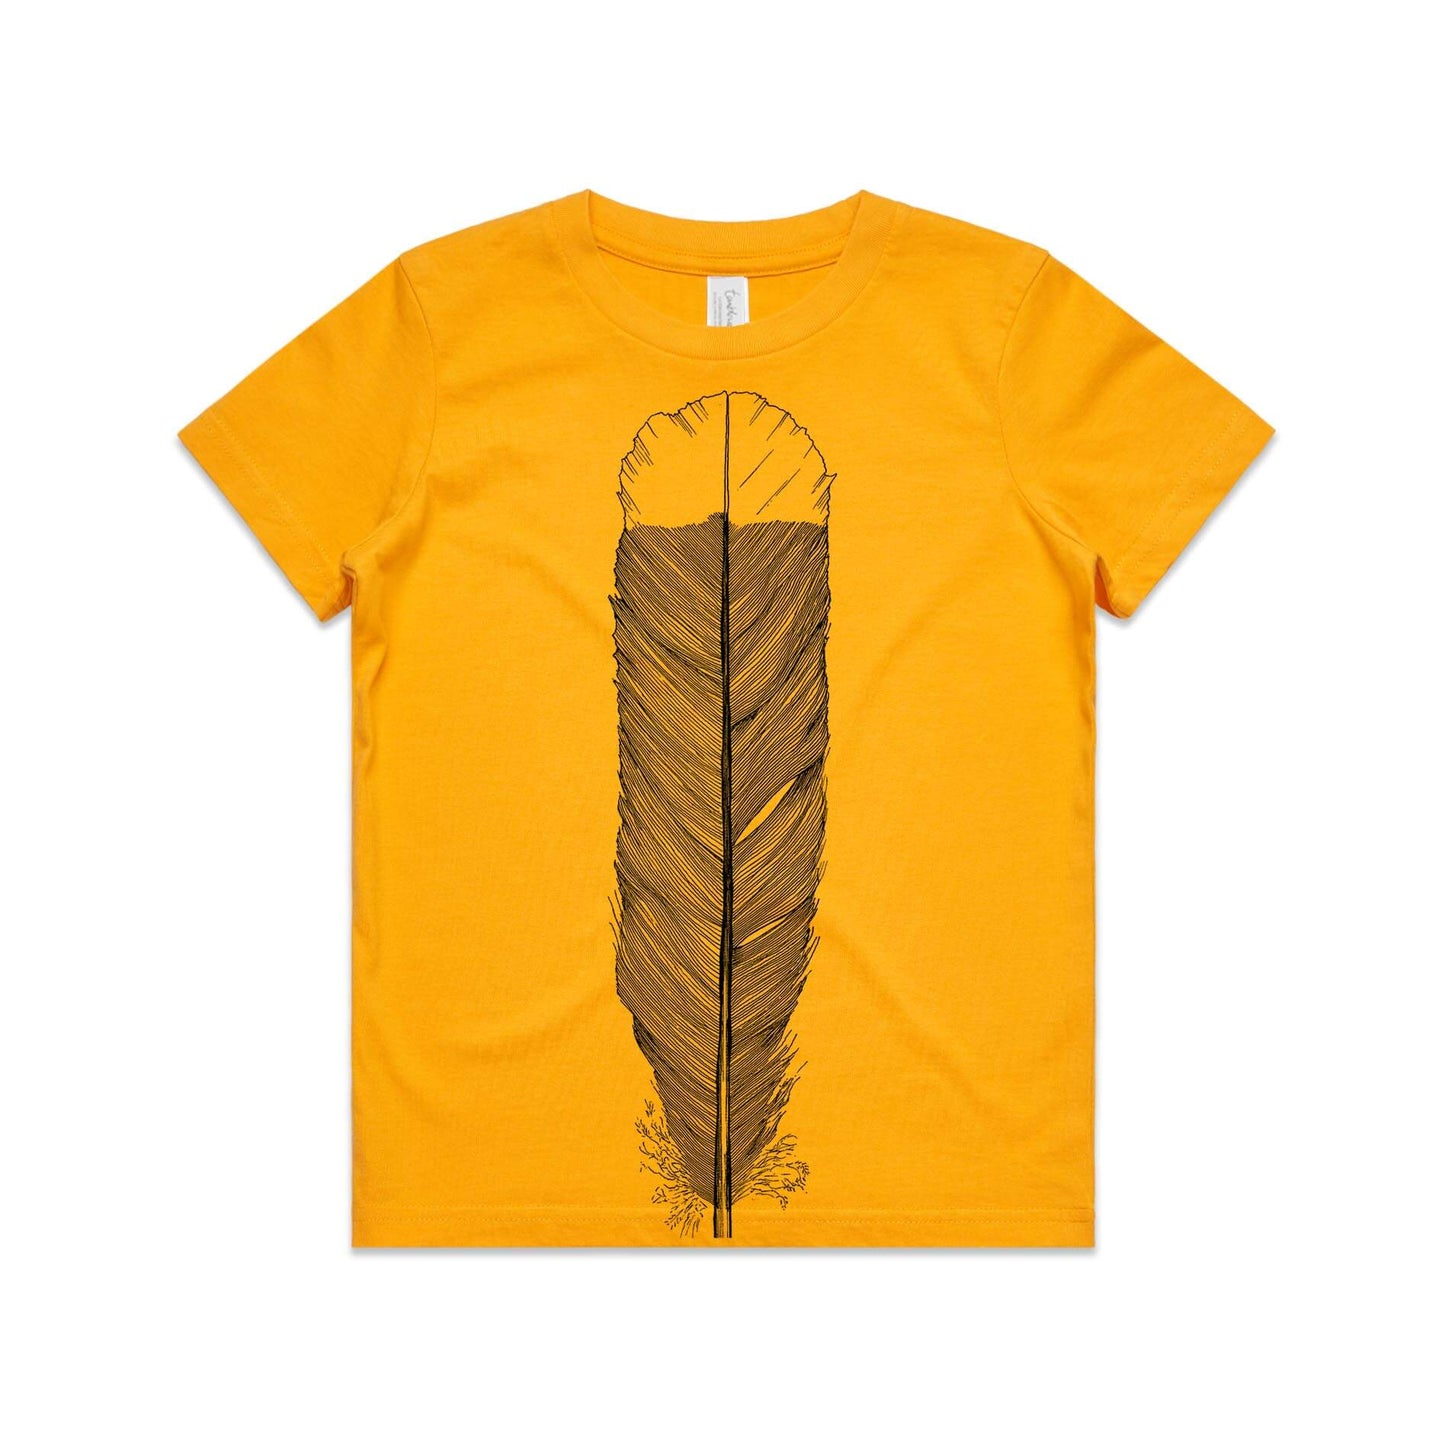 Gold, cotton kids' t-shirt with screen printed Kids huia feather design.